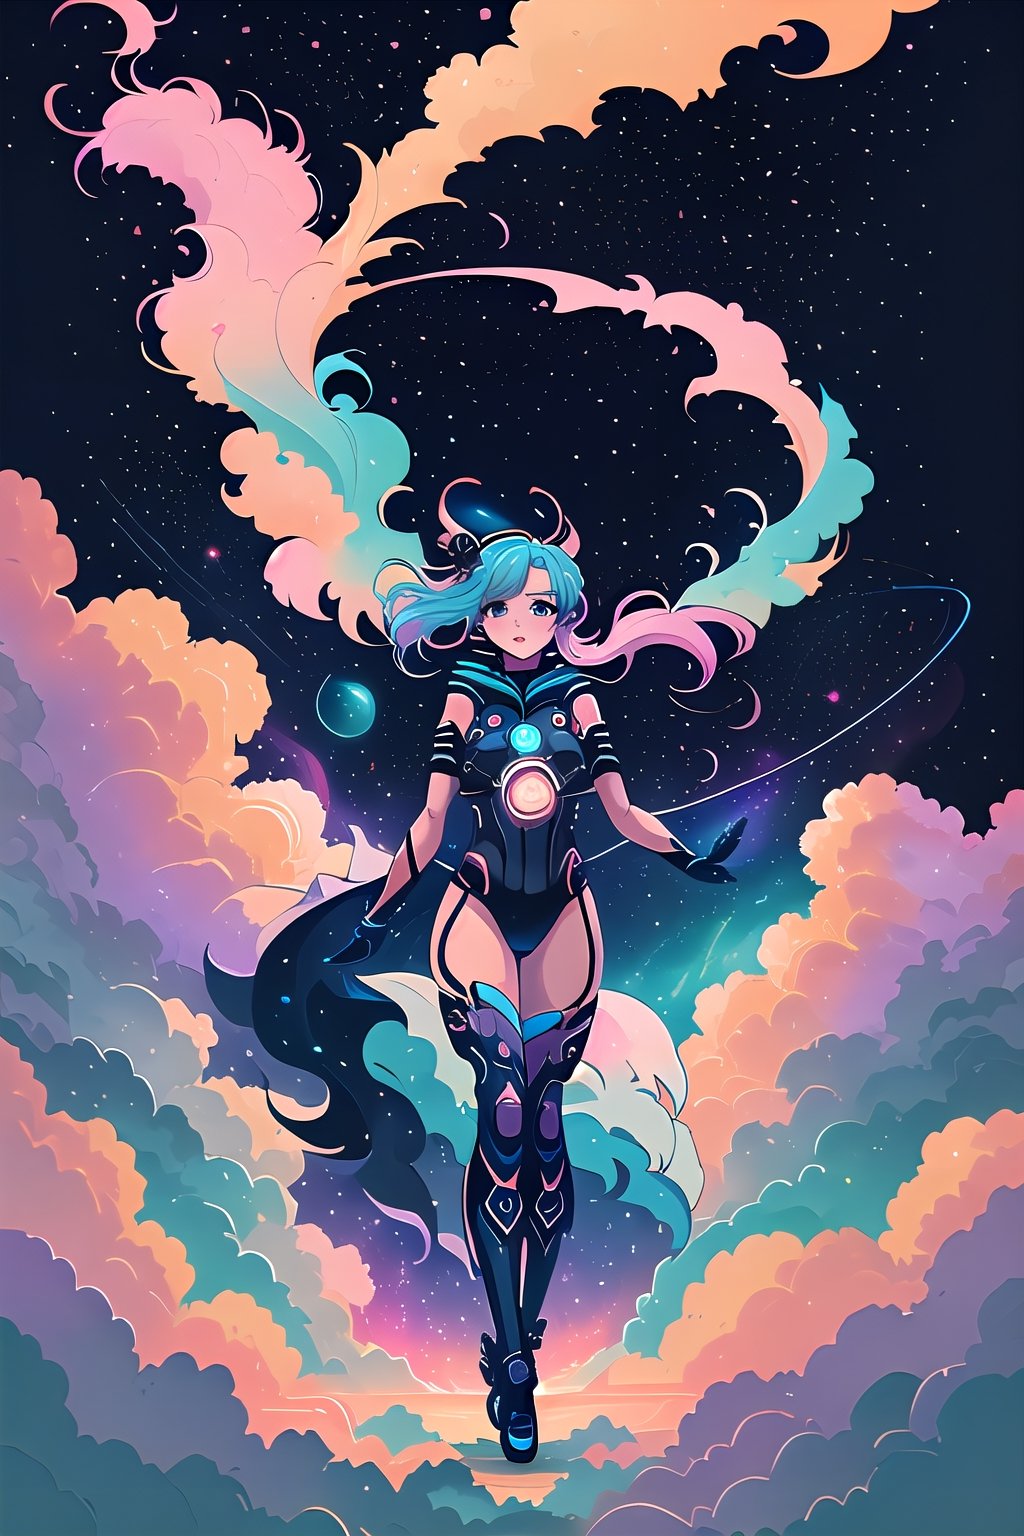 vector art style, adiant nebula,  a scantily clad woman floating through a vibrant cloud of cosmic dust and gas,  with stars twinkling in every direction around her,tshee00d